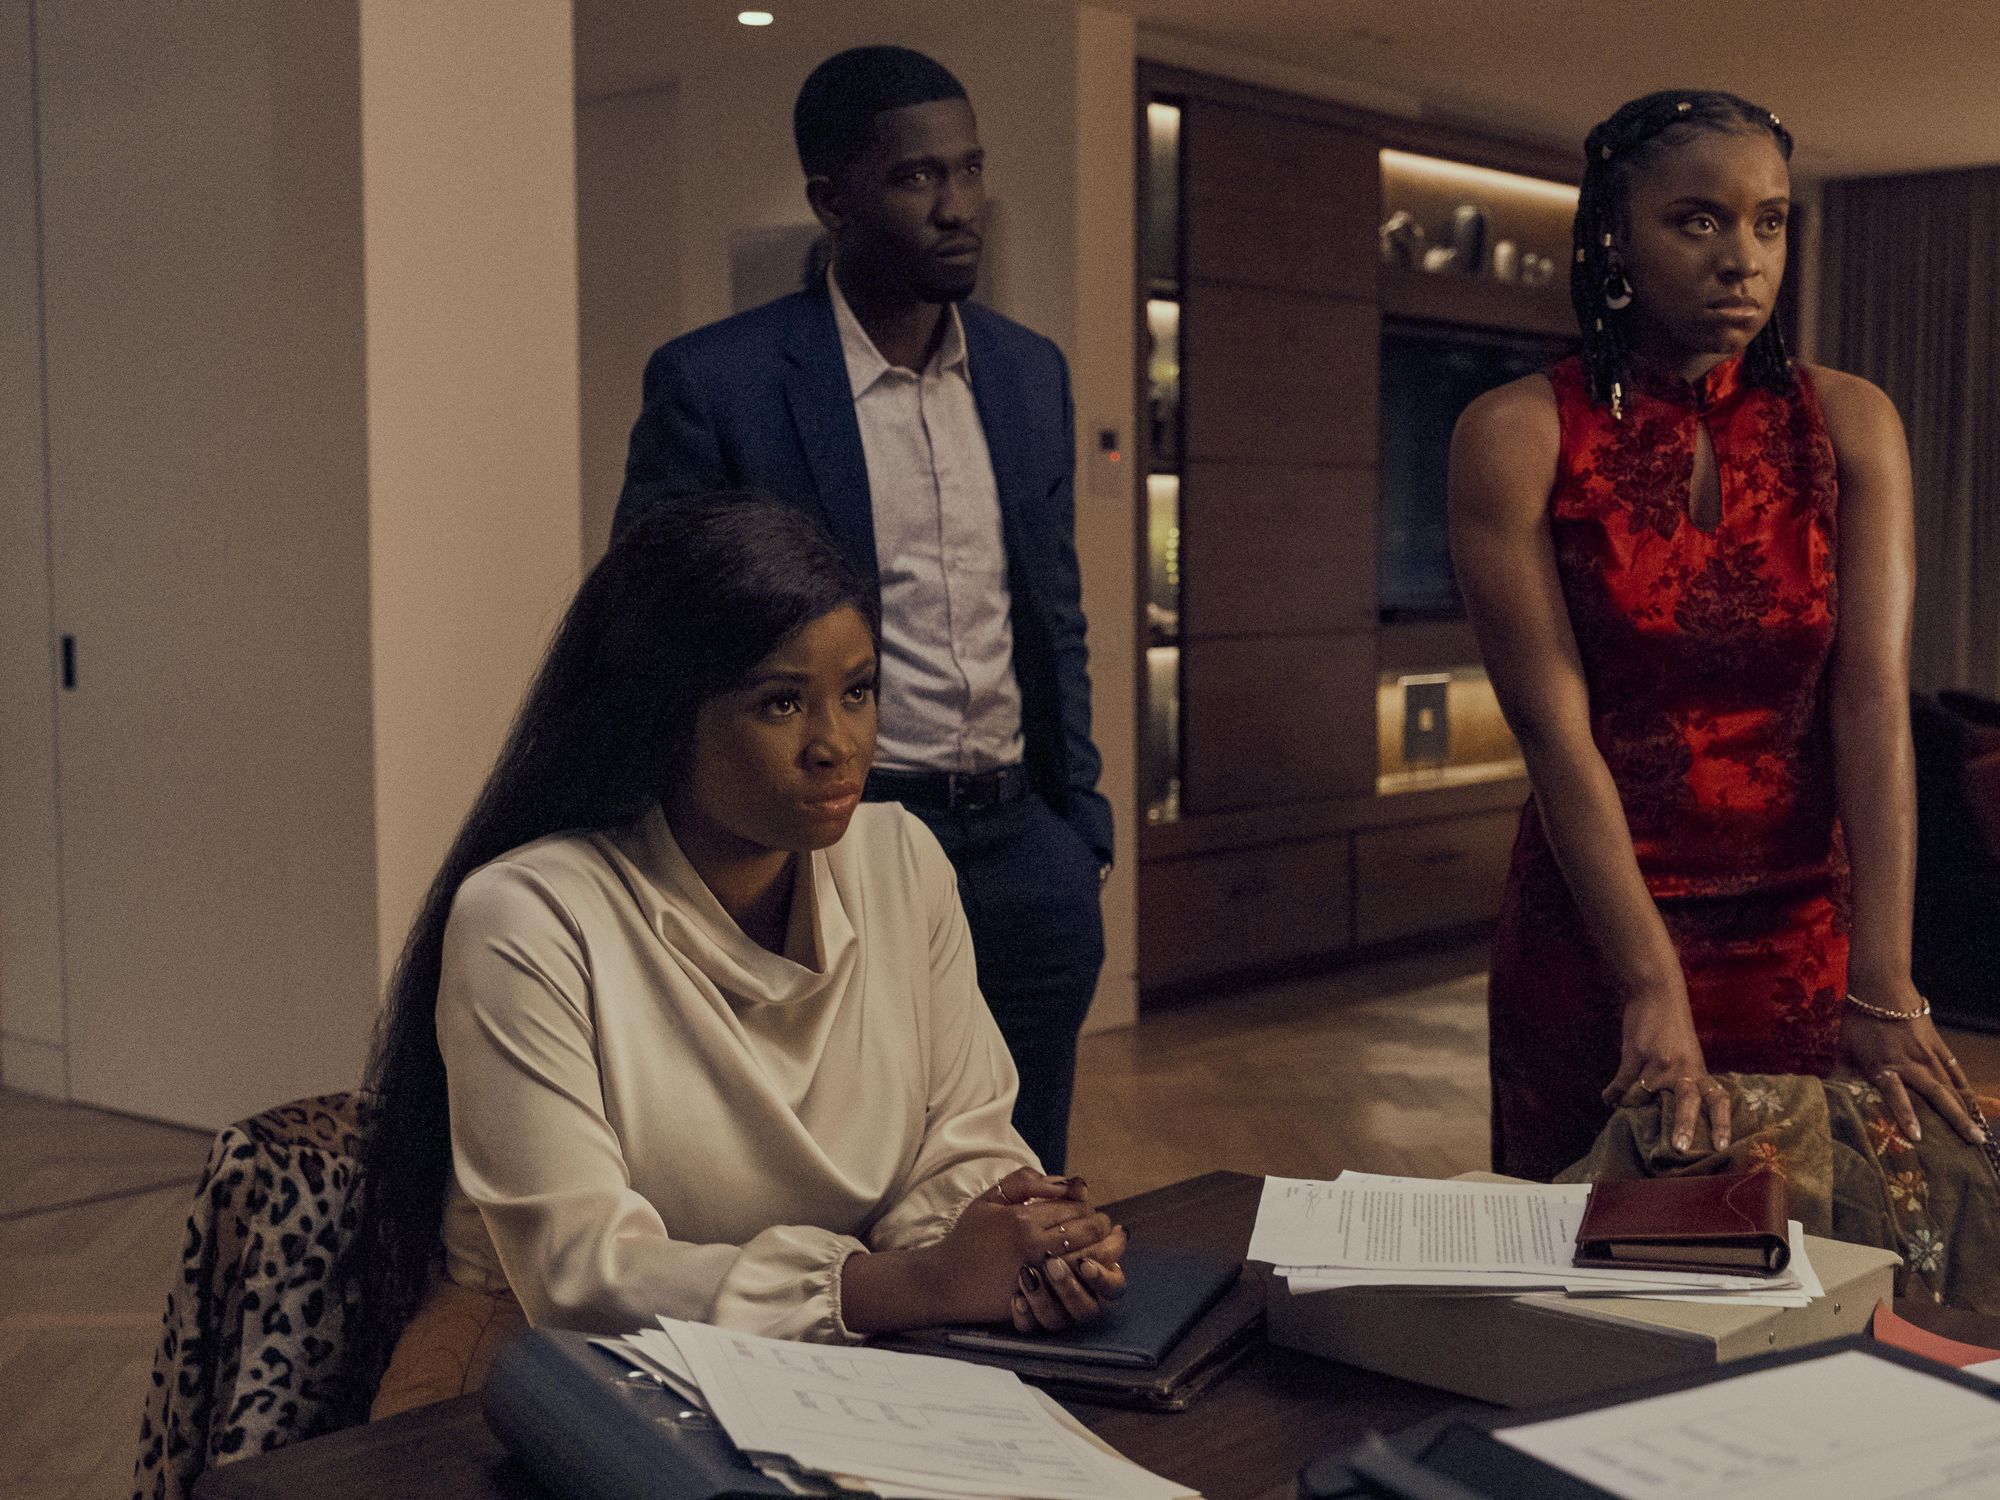 Abby Ajayi’s 'Riches' Packs in the Glitz Along with the Drama